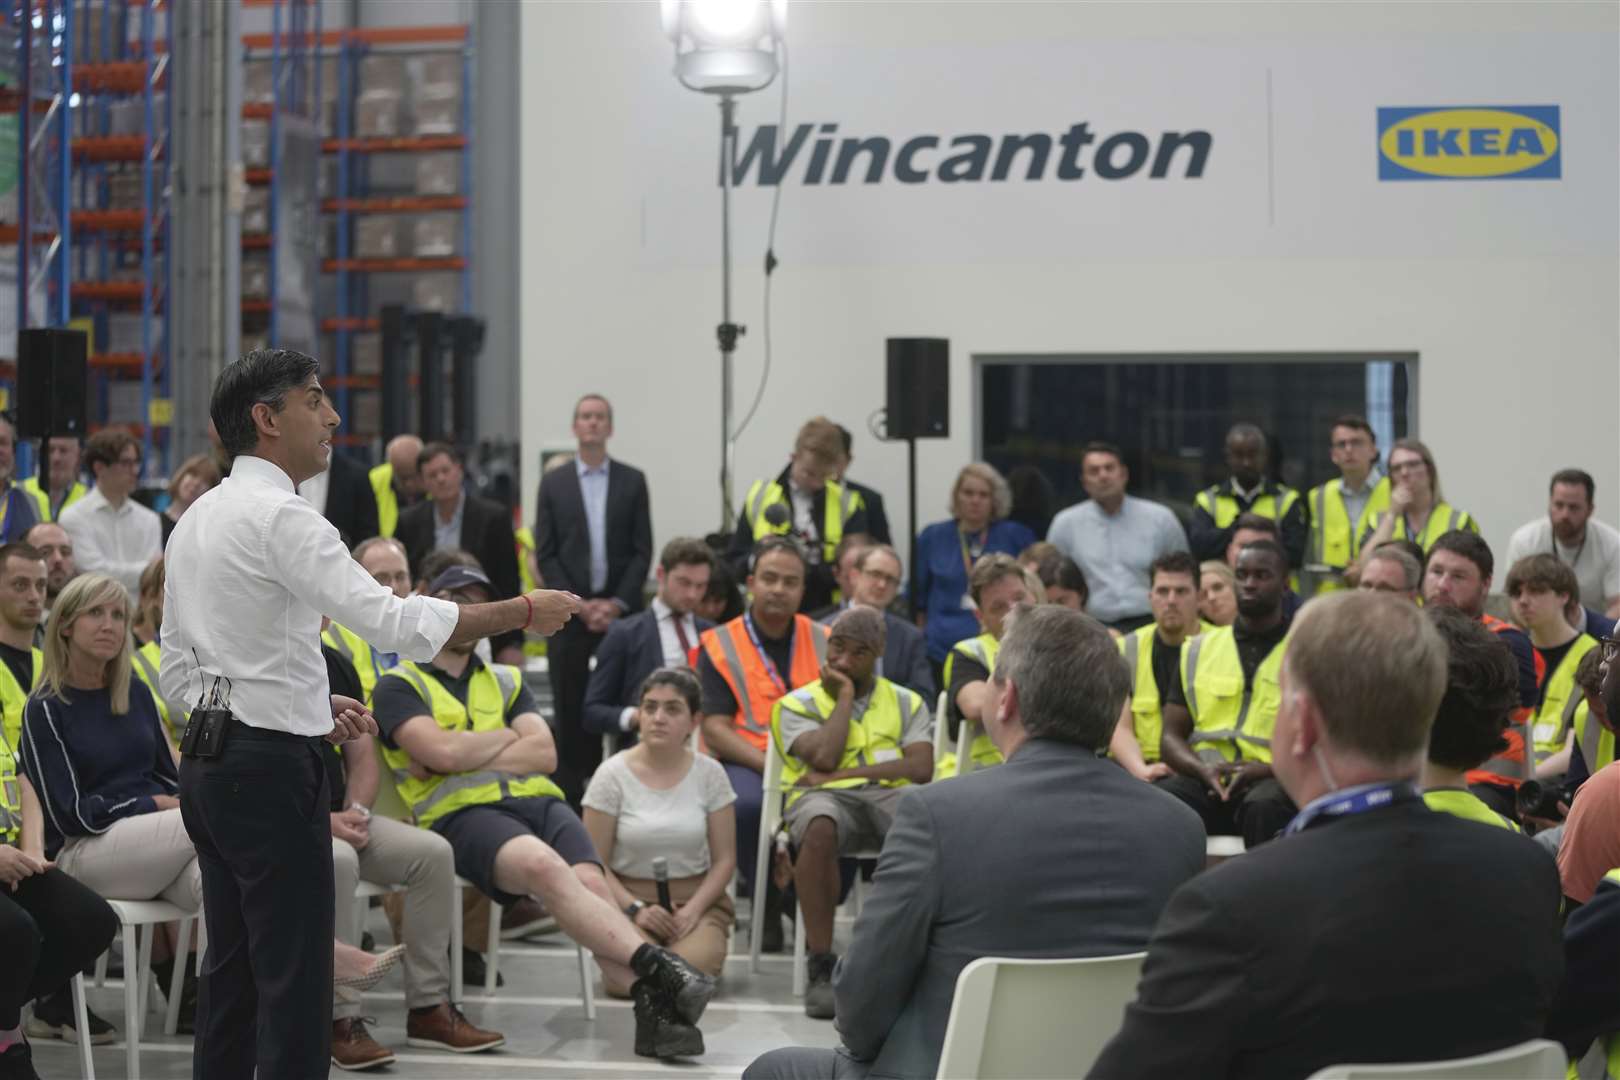 Rishi Sunak speaking at a PM Connect event at the Ikea distribution centre in Dartford, Kent (Kin Cheung/PA)